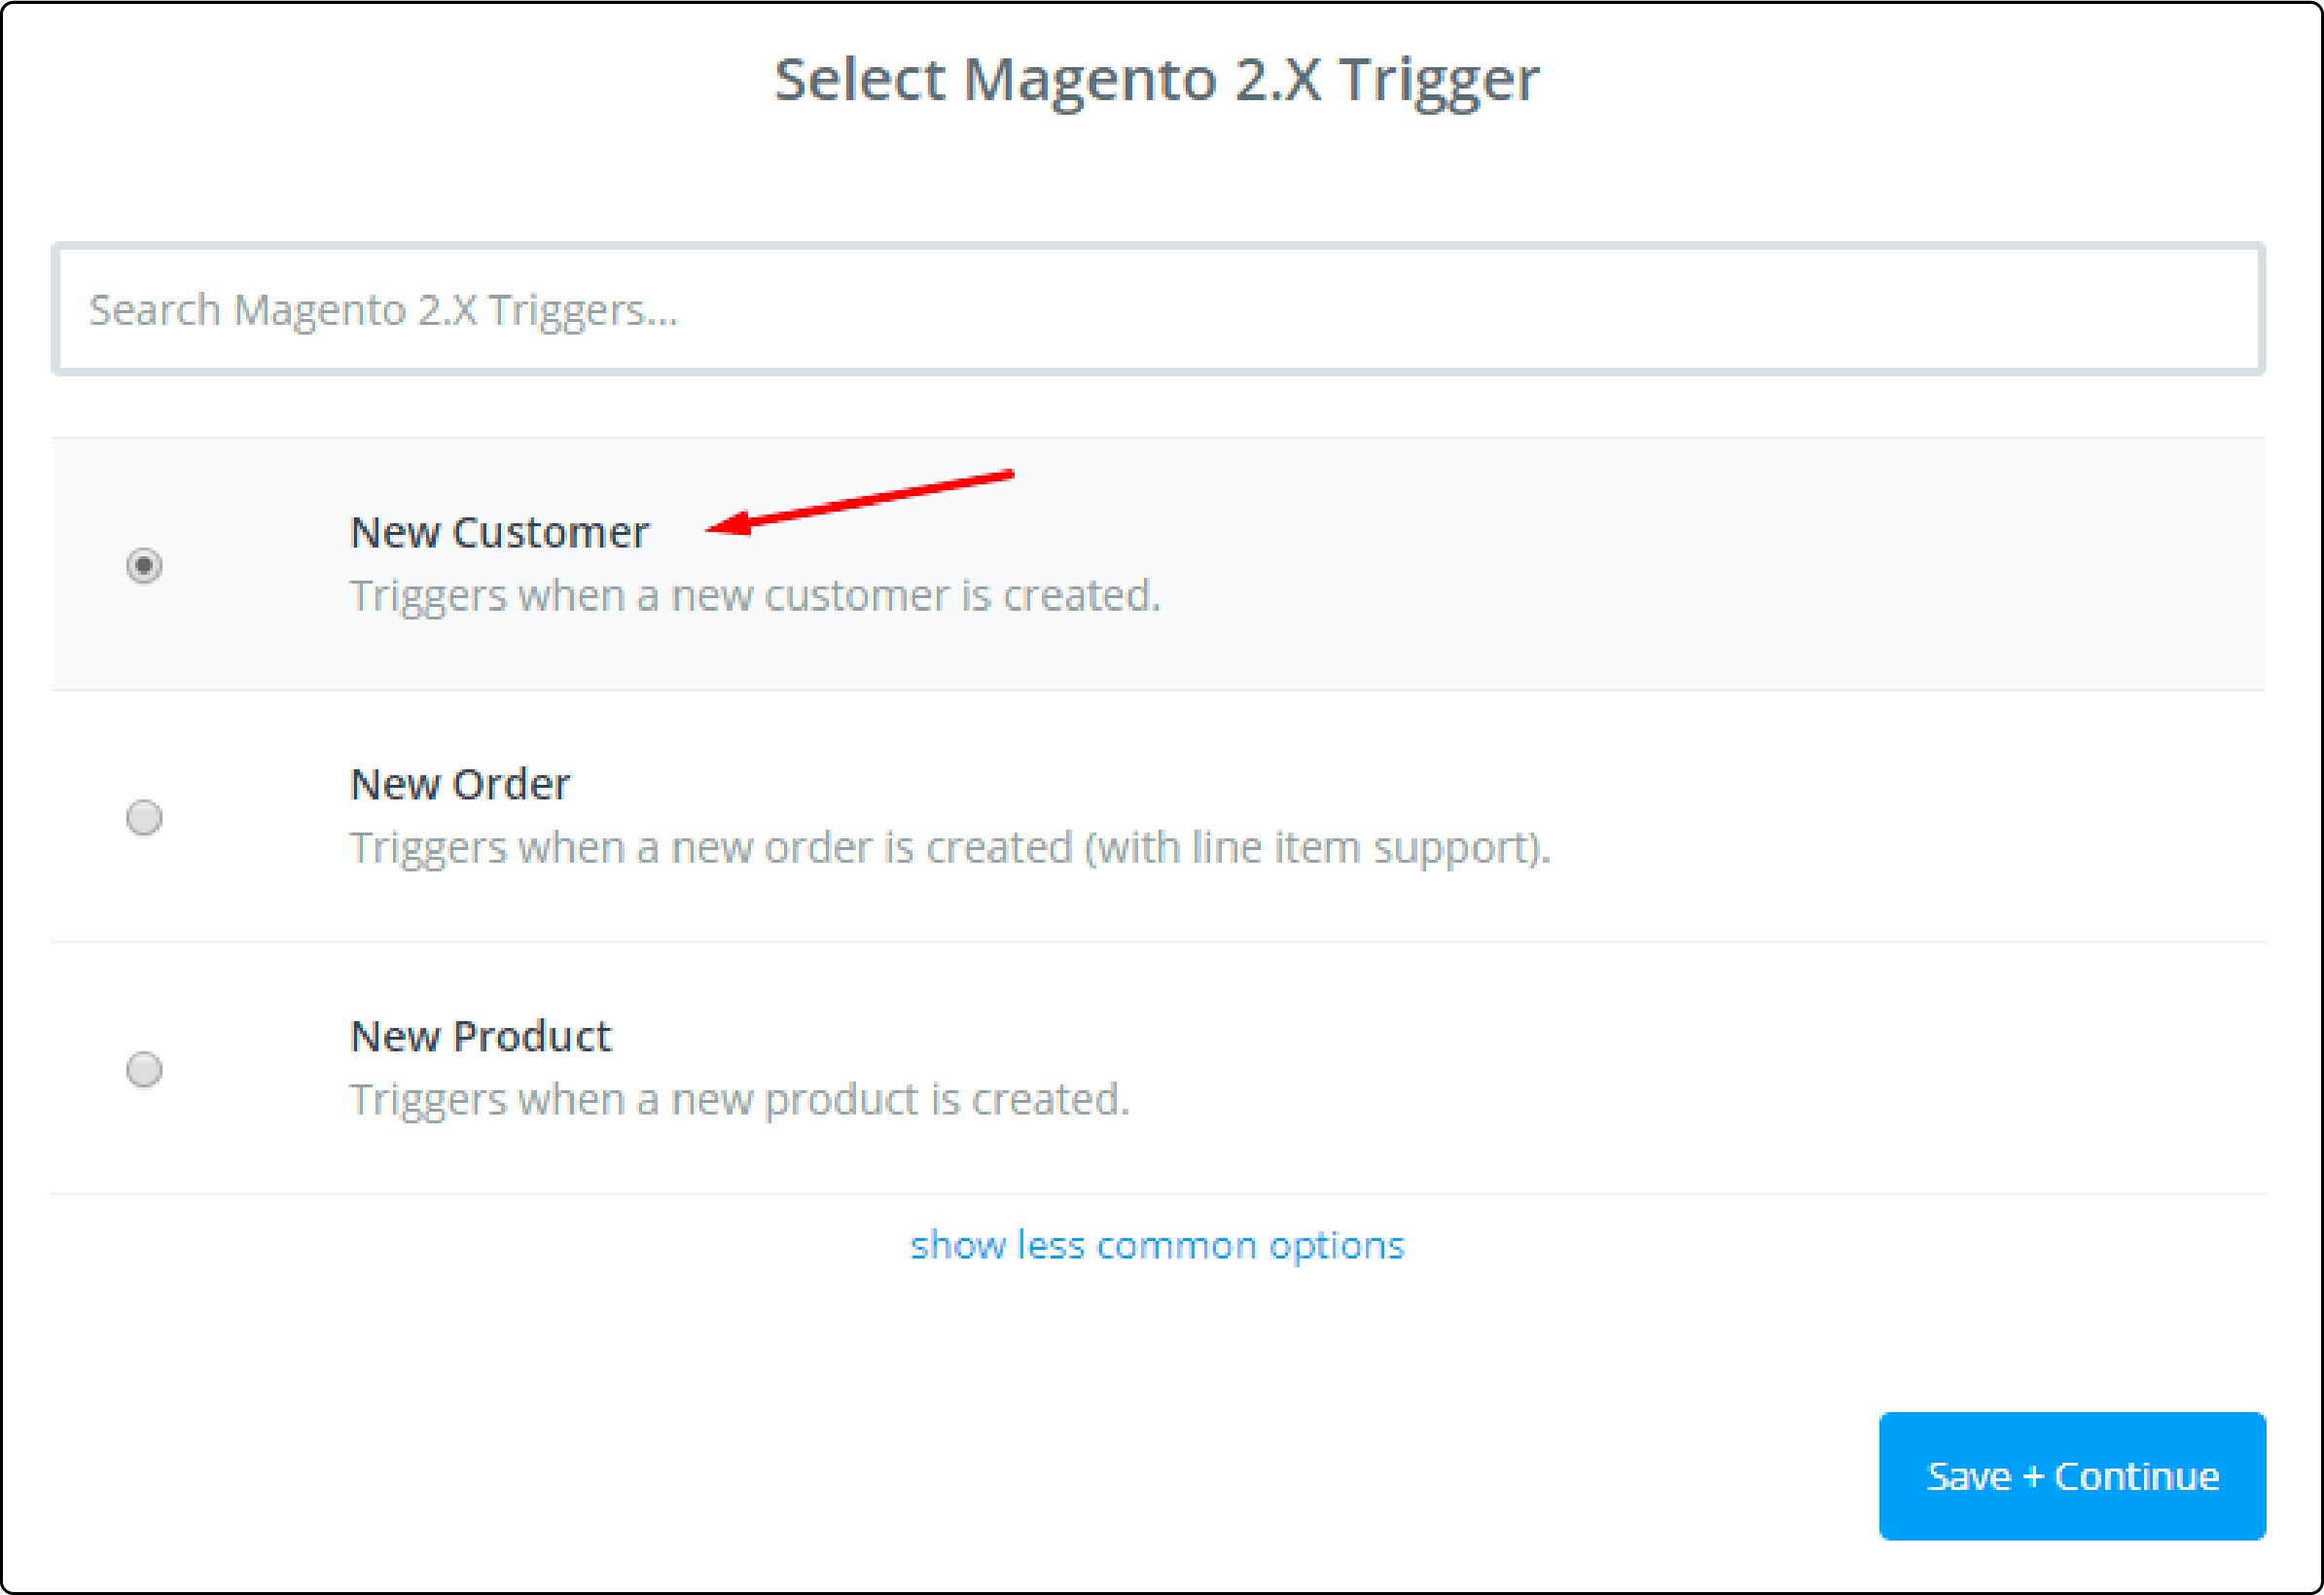 Configuring new customer trigger in Magento for Salesforce CRM sync